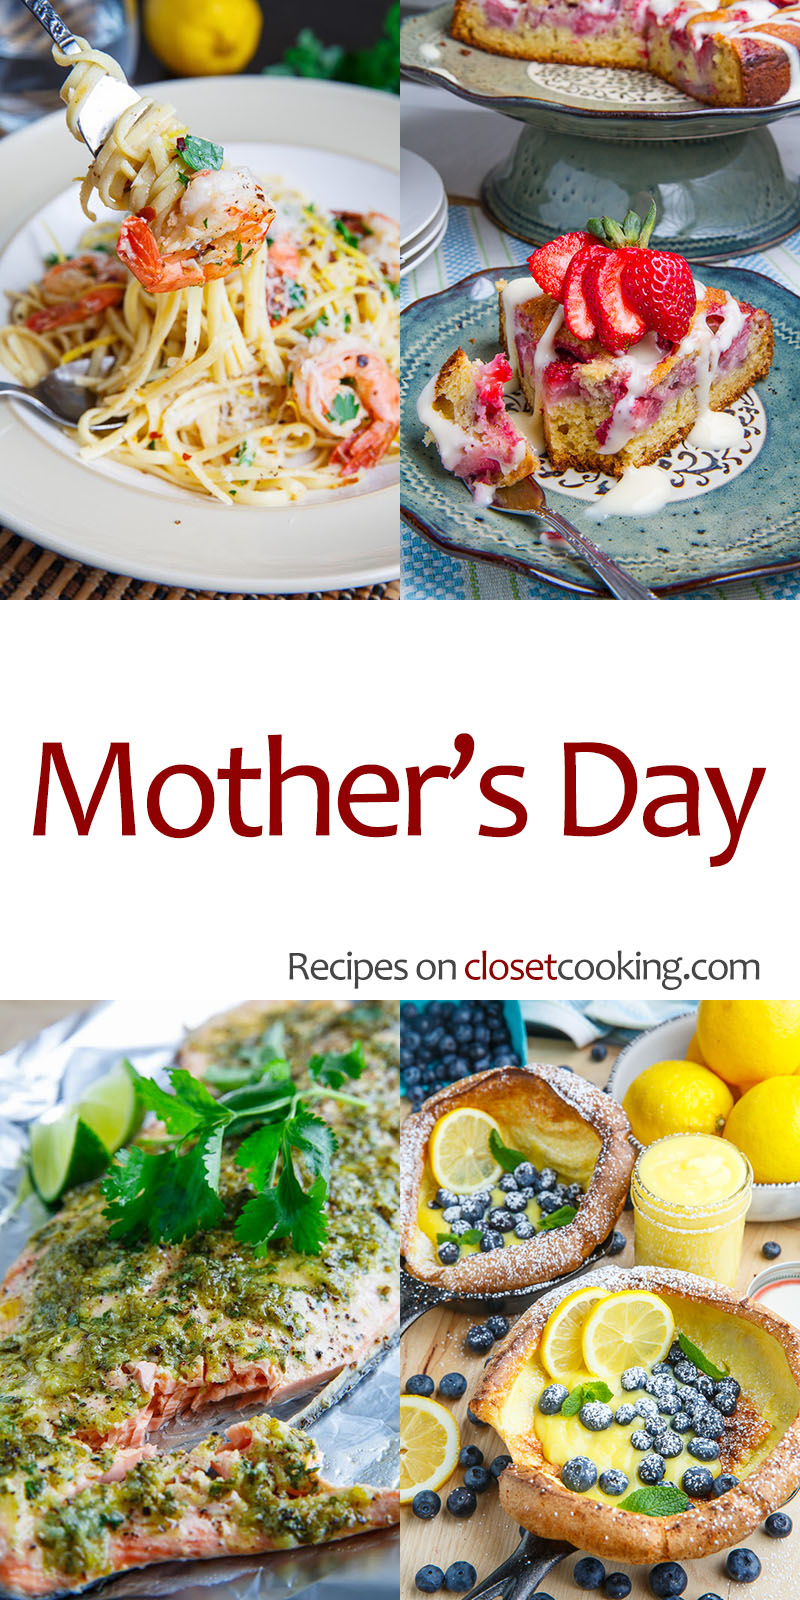 Mother’s Day Recipes